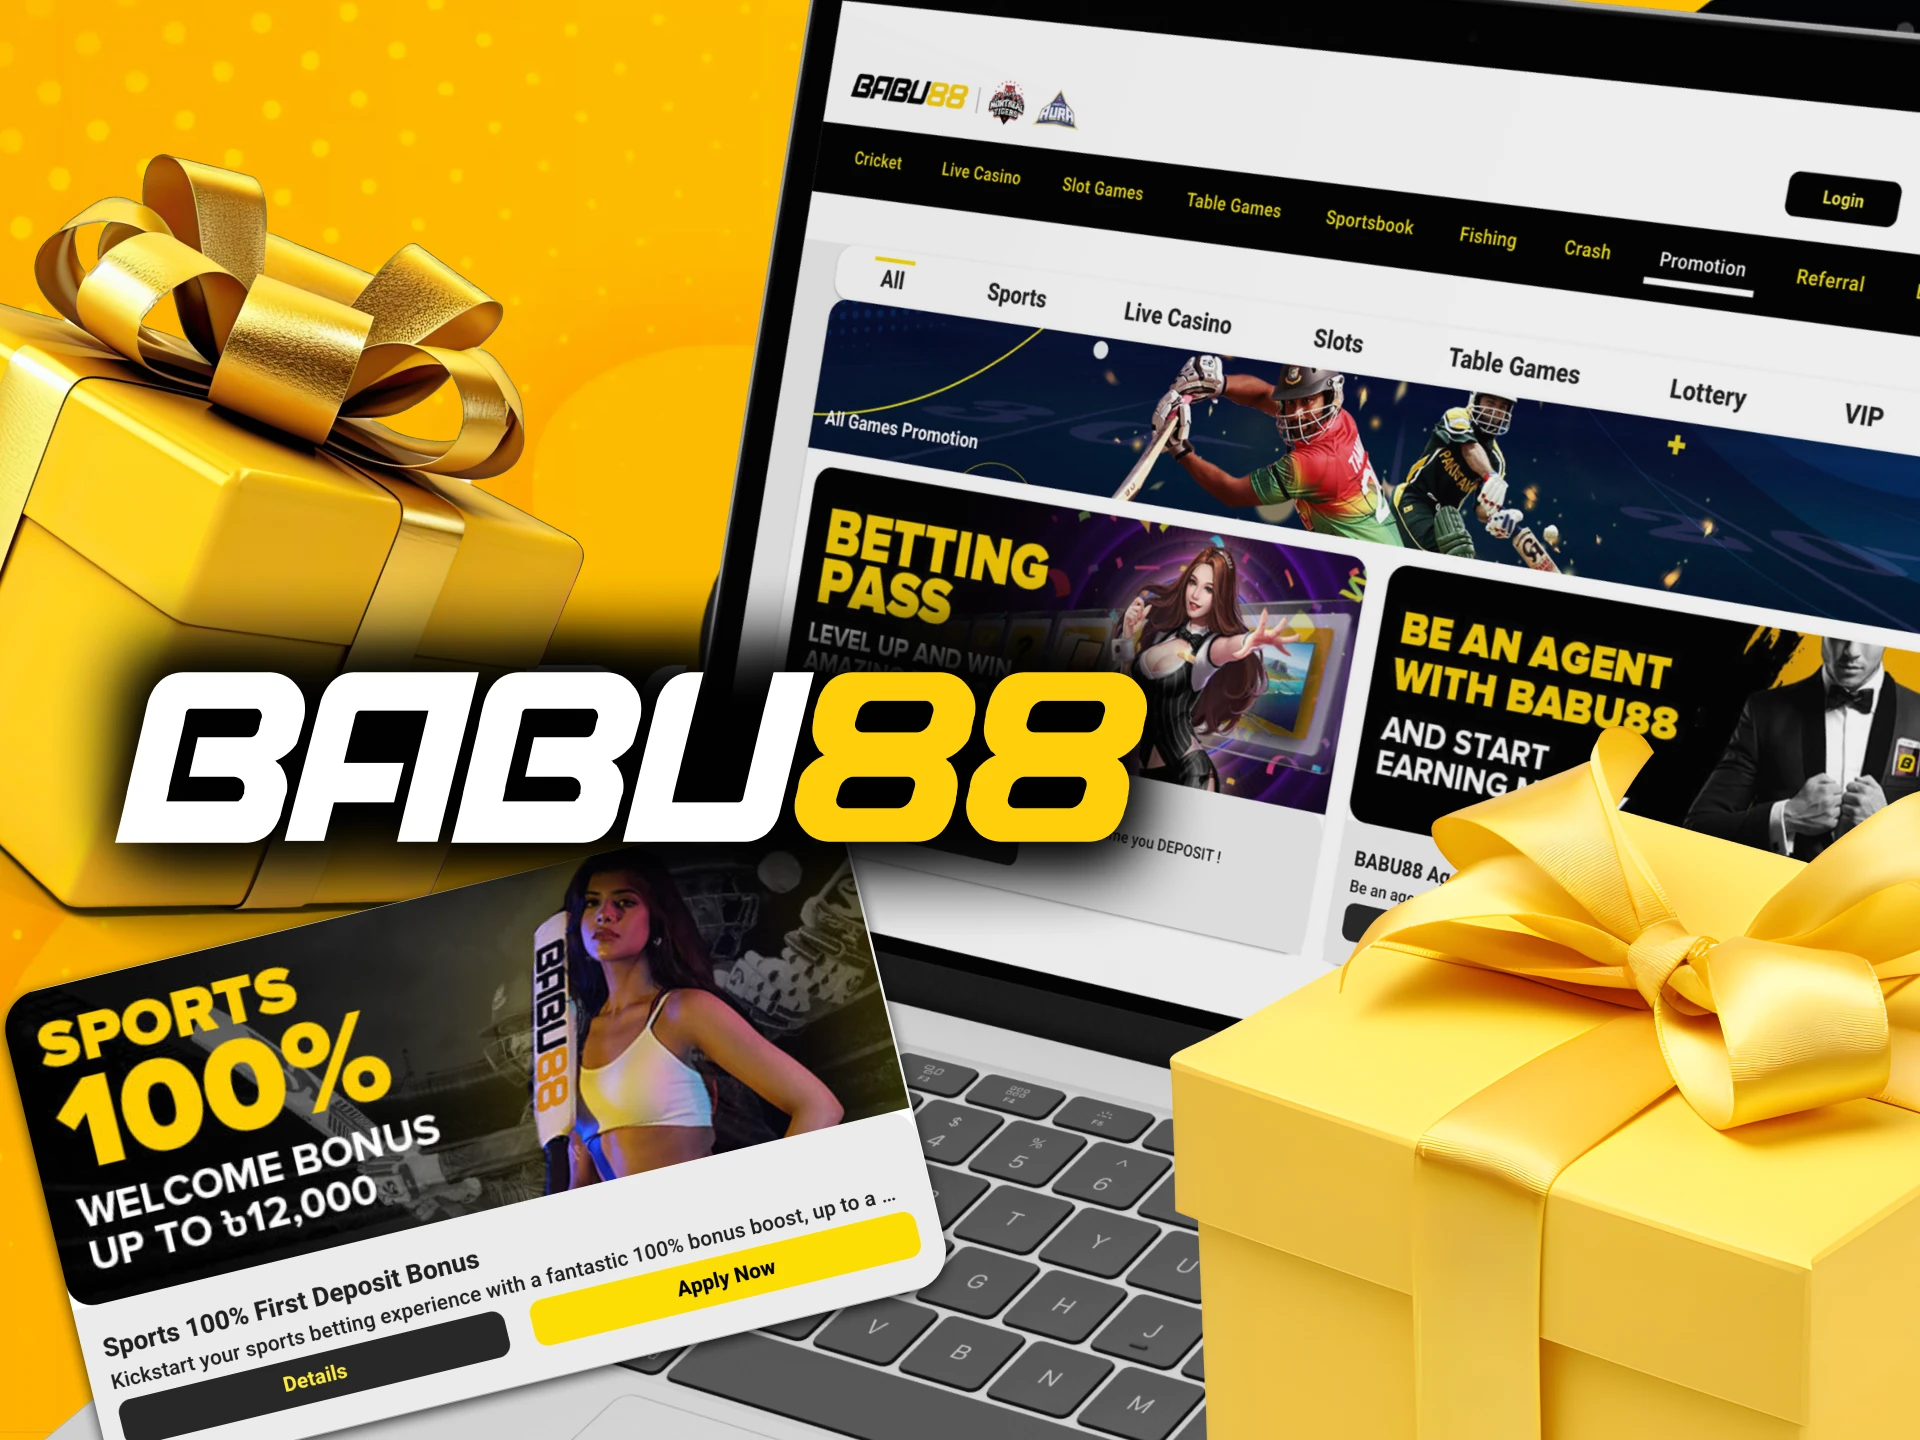 What bonuses can I get if I bet on IPL on the Babu88 online casino website.